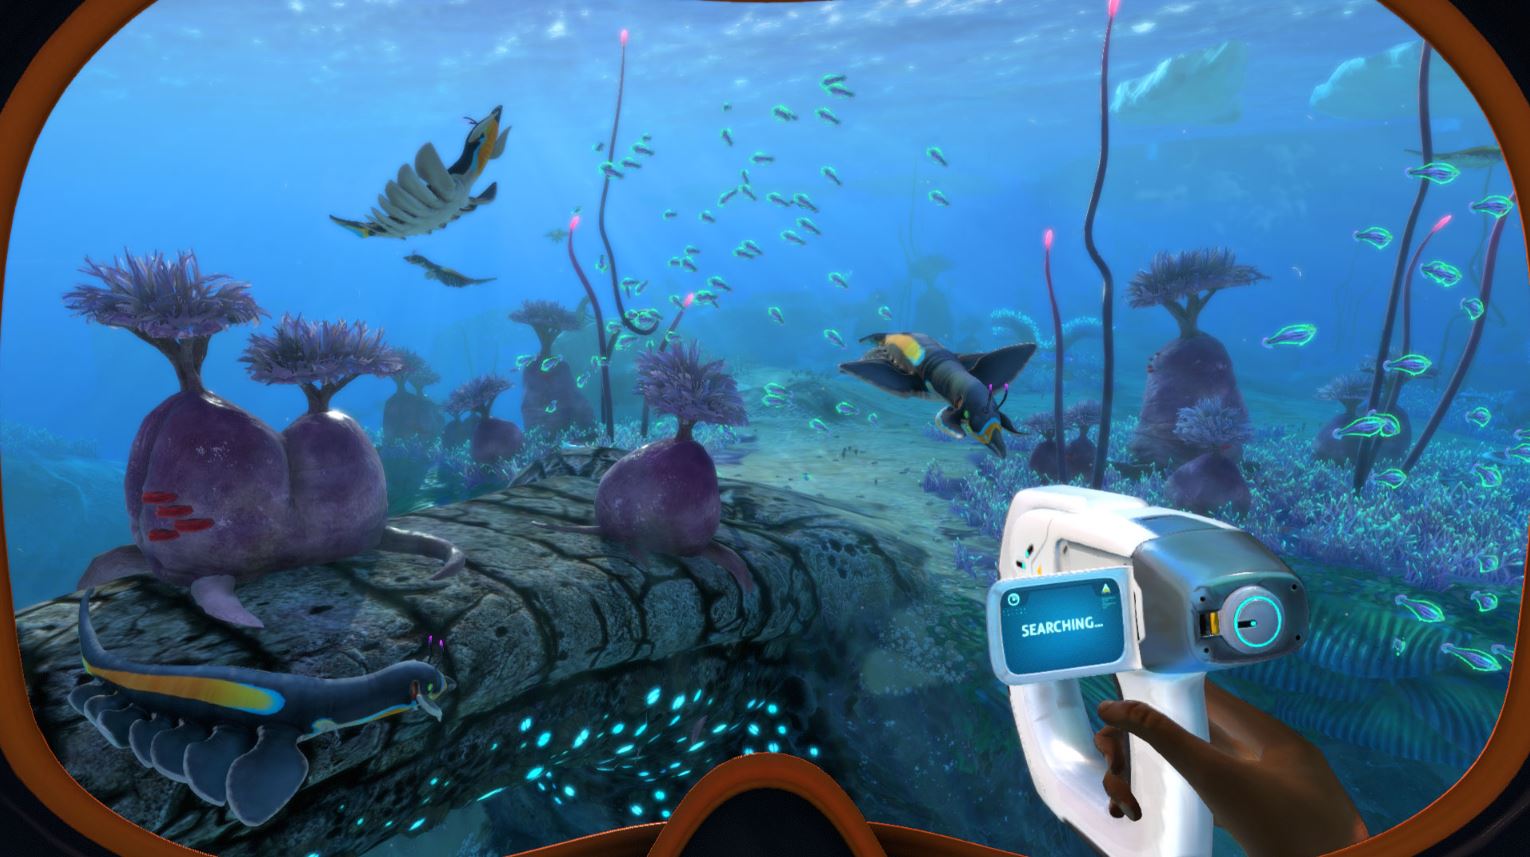 can you get subnautica on nintendo switch